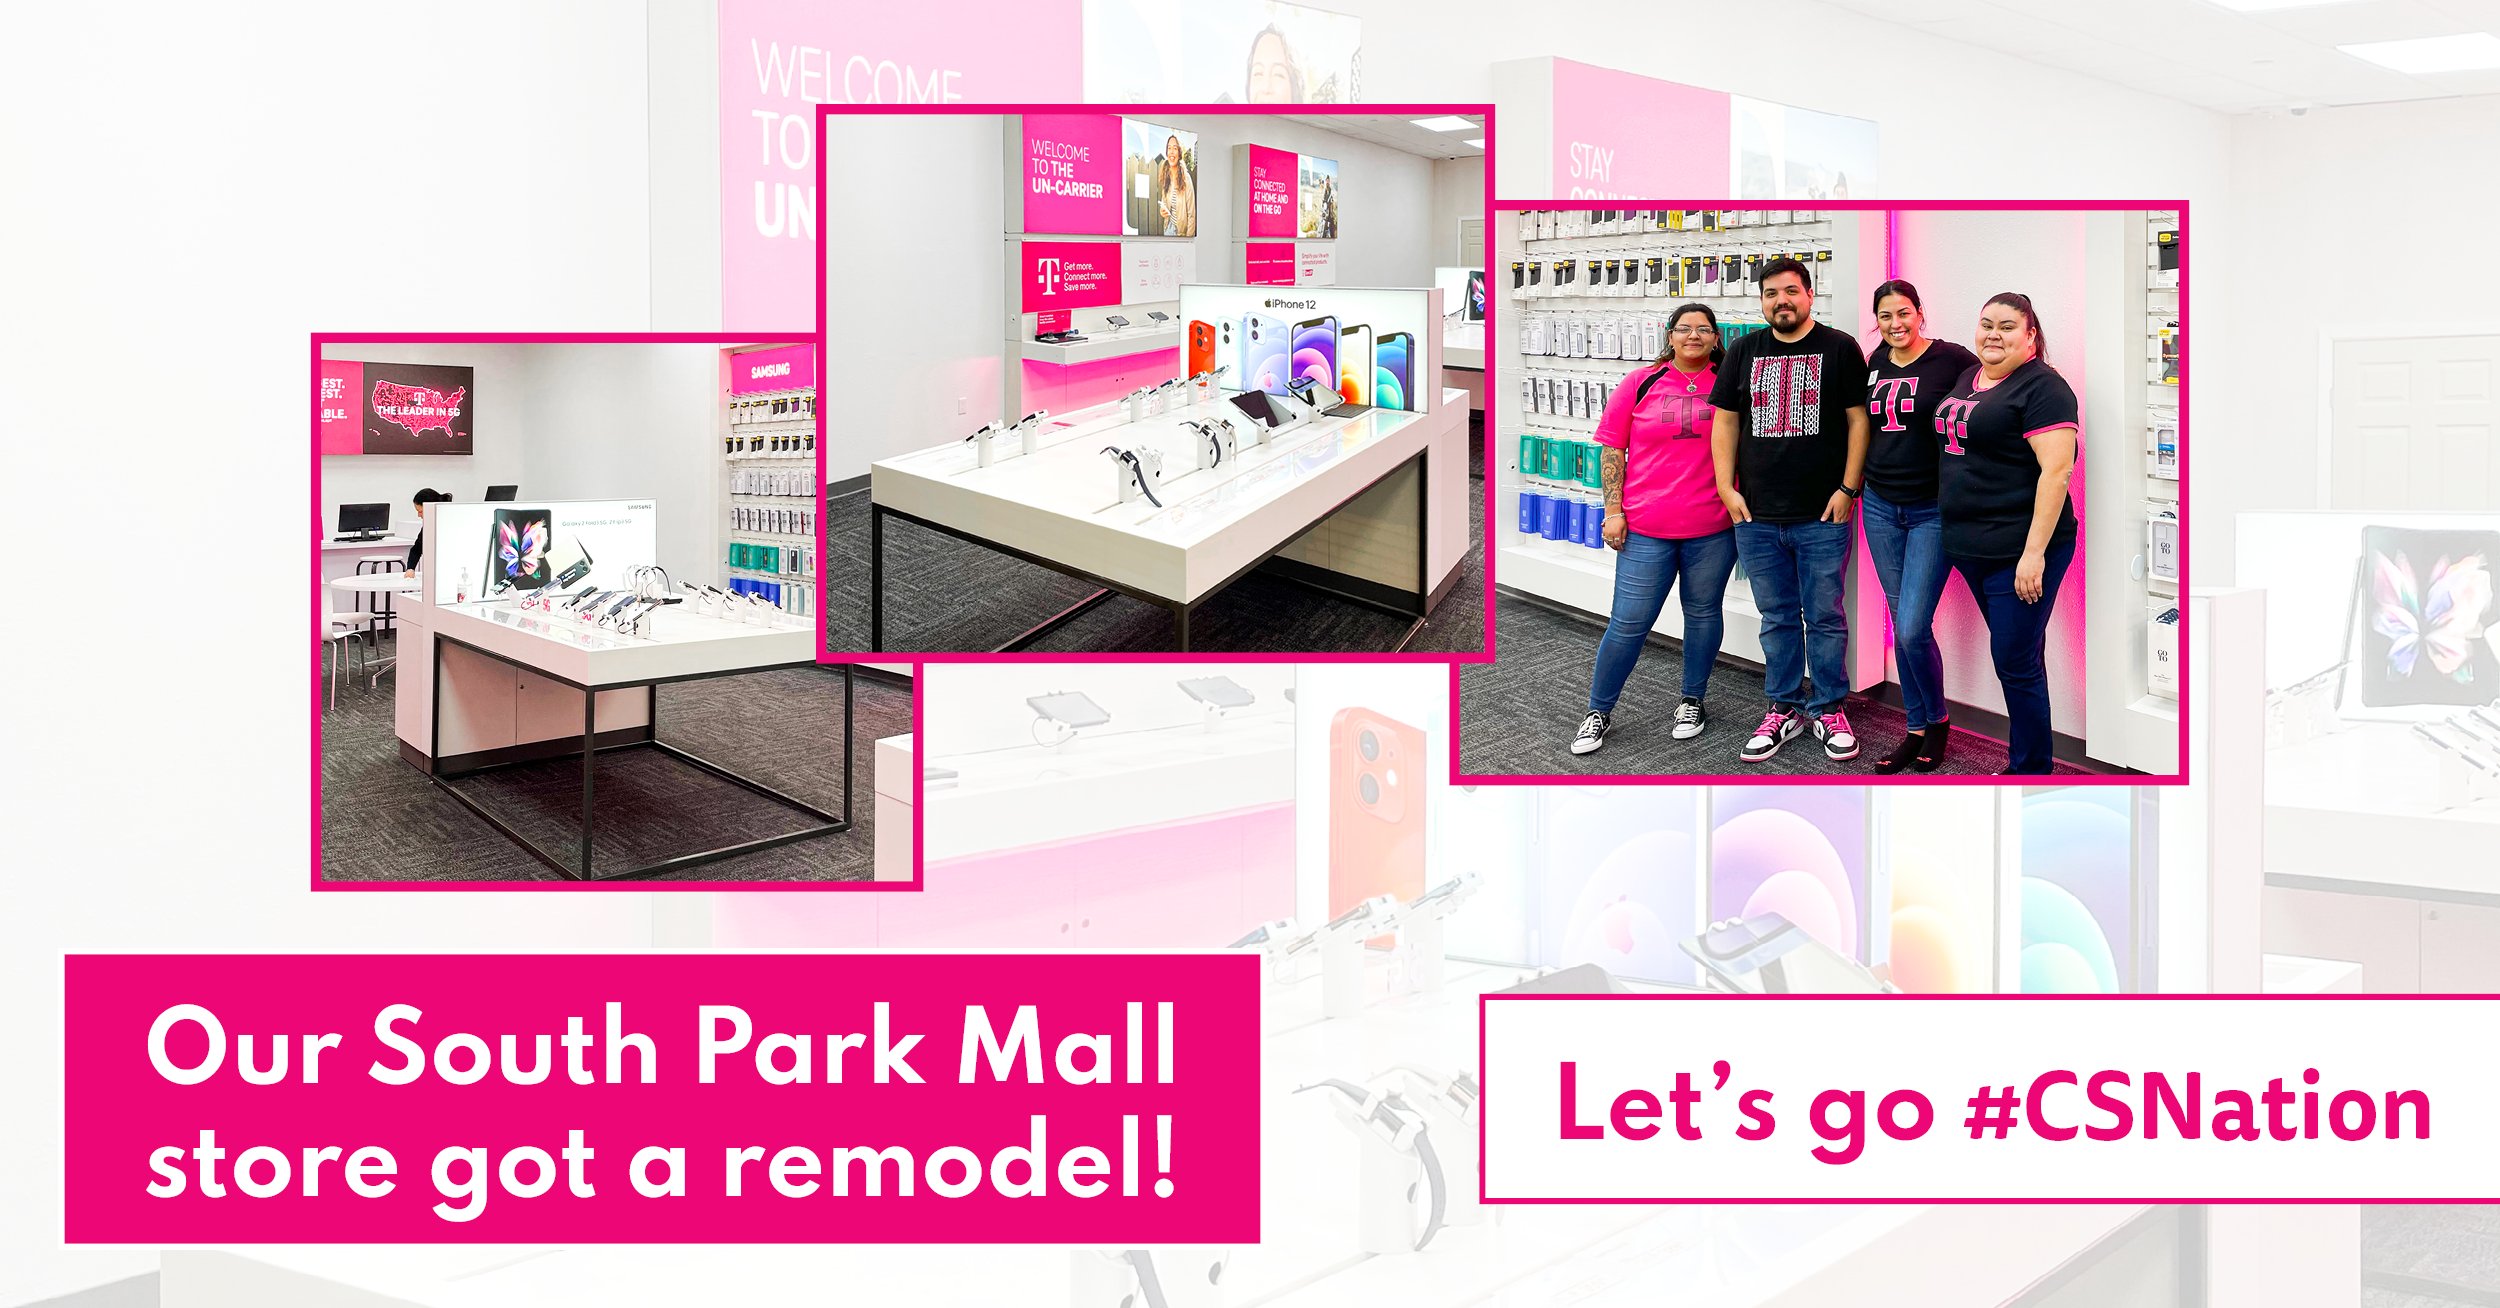 T-Mobile South Park Mall